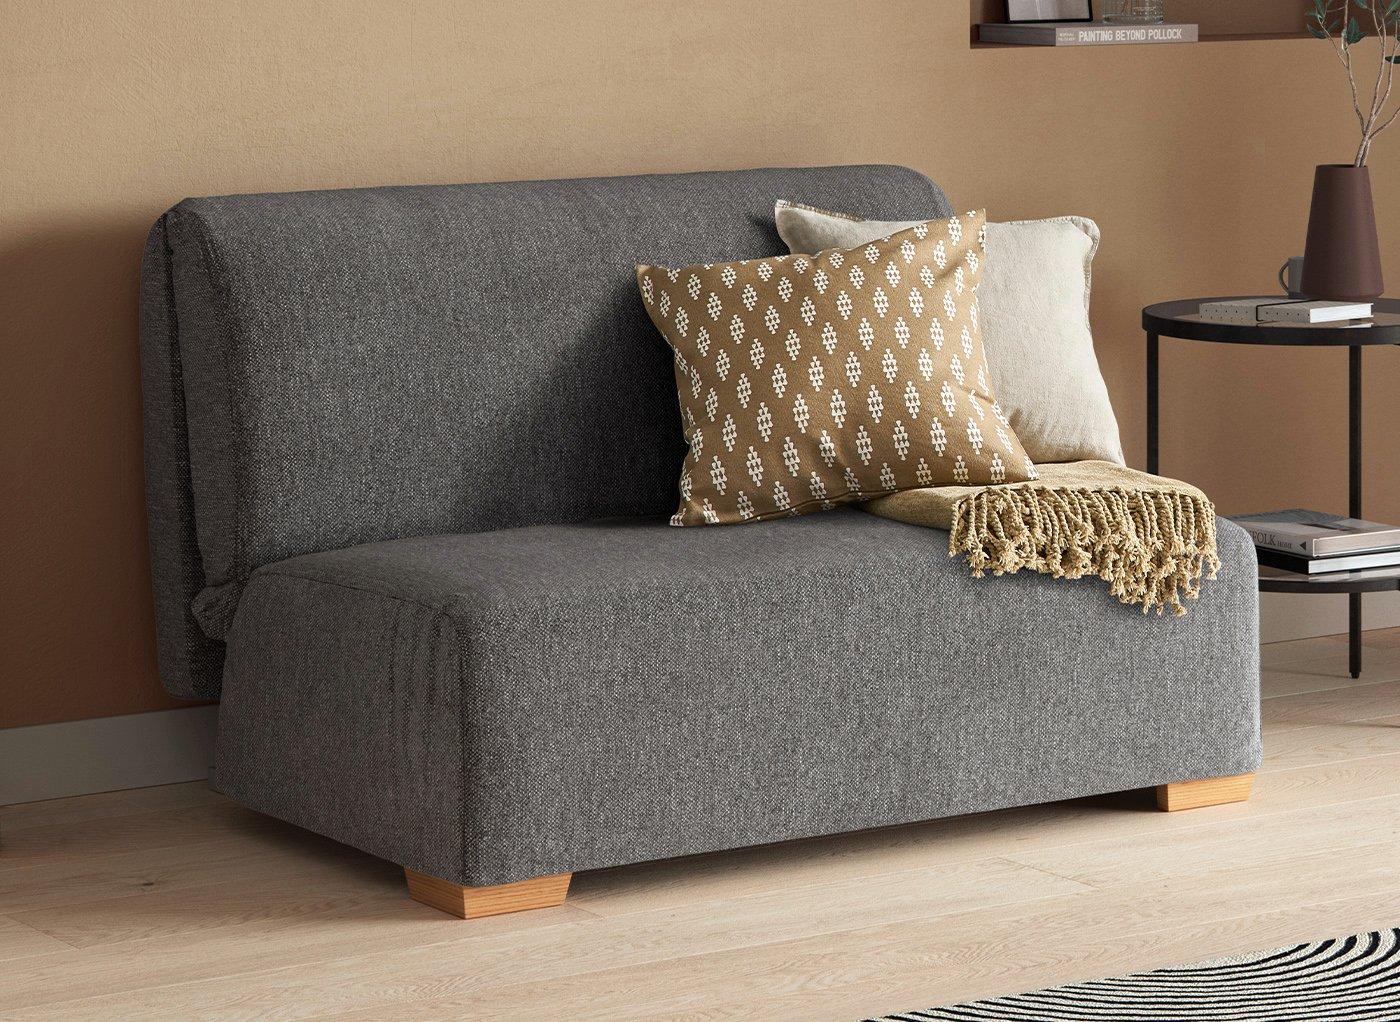 Cork 2 Seater 4'0 A-Frame Sofa Bed - Grey Small Double